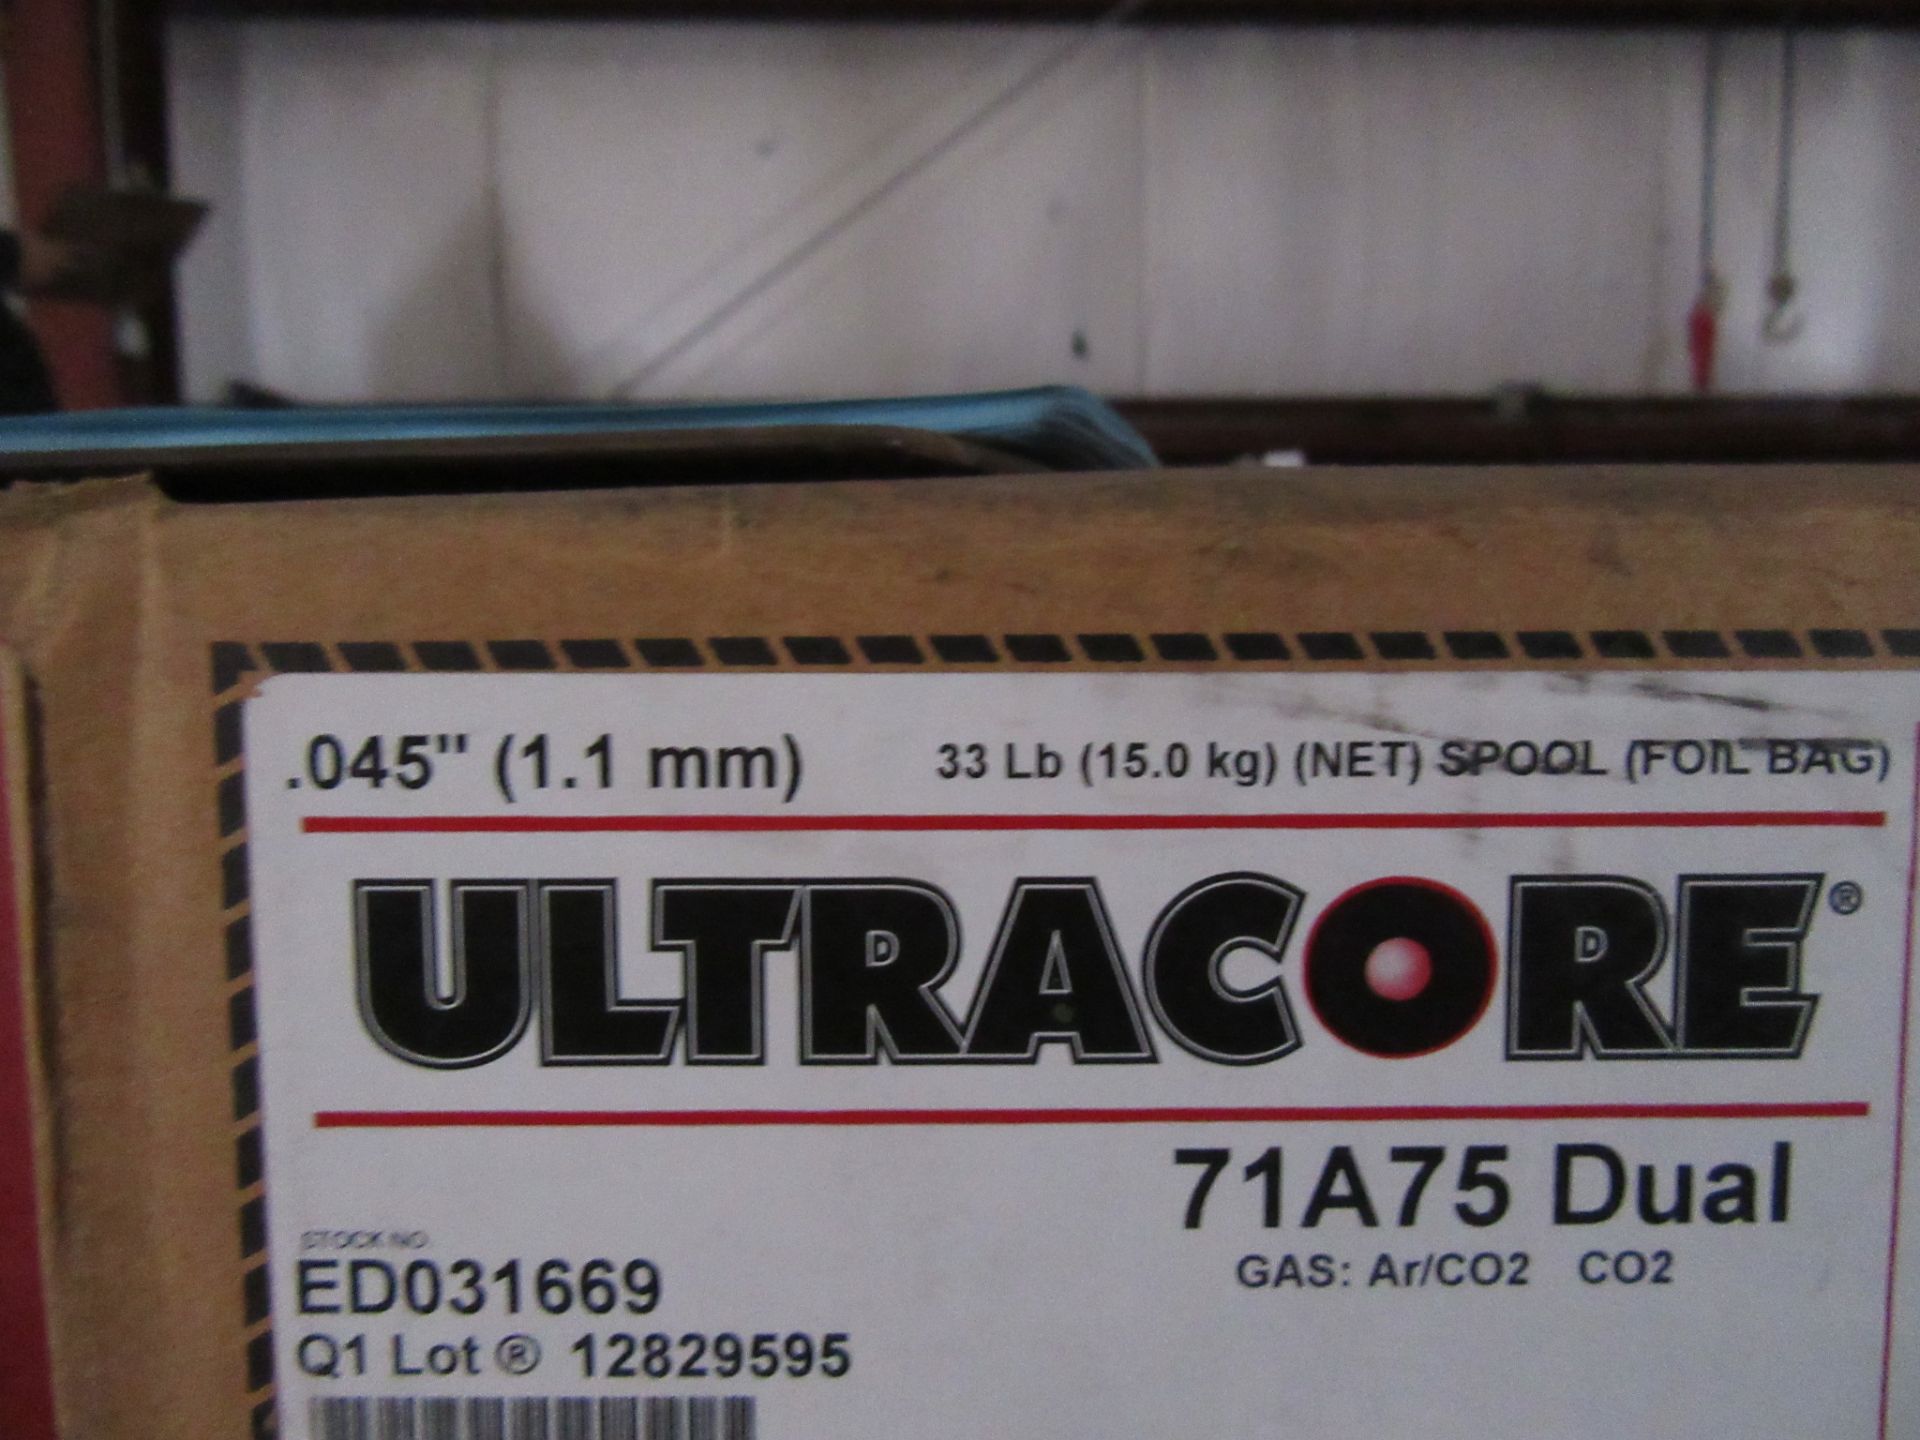 LOT (34) SPOOLS .045 LINCOLN ULTRACORE 71A75 DUAL CORE WIRE, STOCK NO. ED031669, (BACK BUILDING) - Image 2 of 2